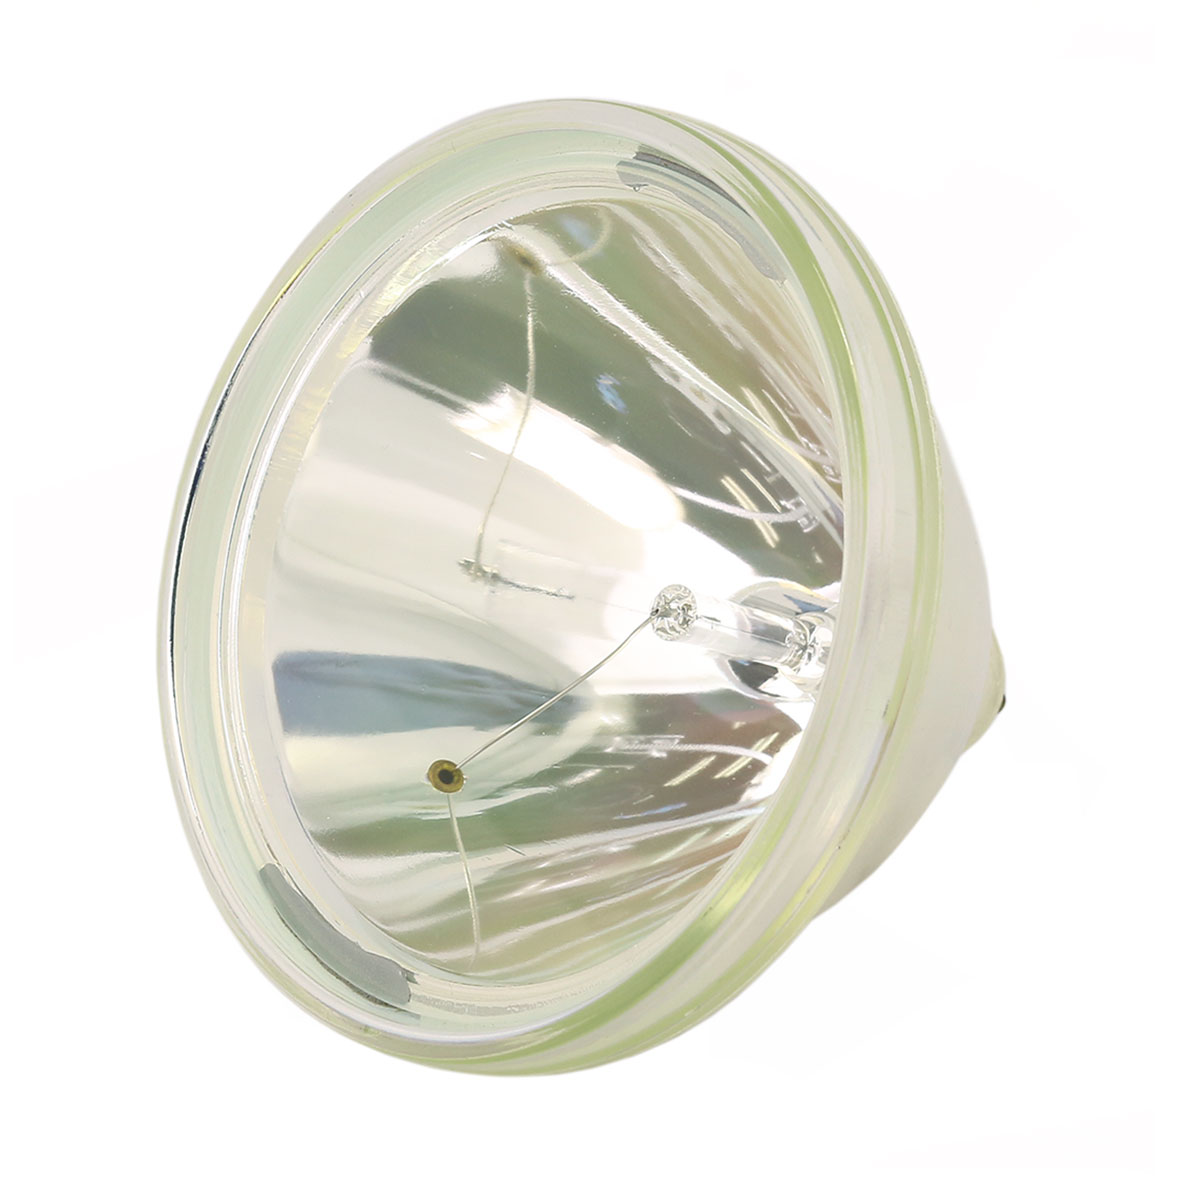 Lutema Economy Bulb for Philips Fellini 100 TV Lamp (Lamp Only) - image 1 of 6